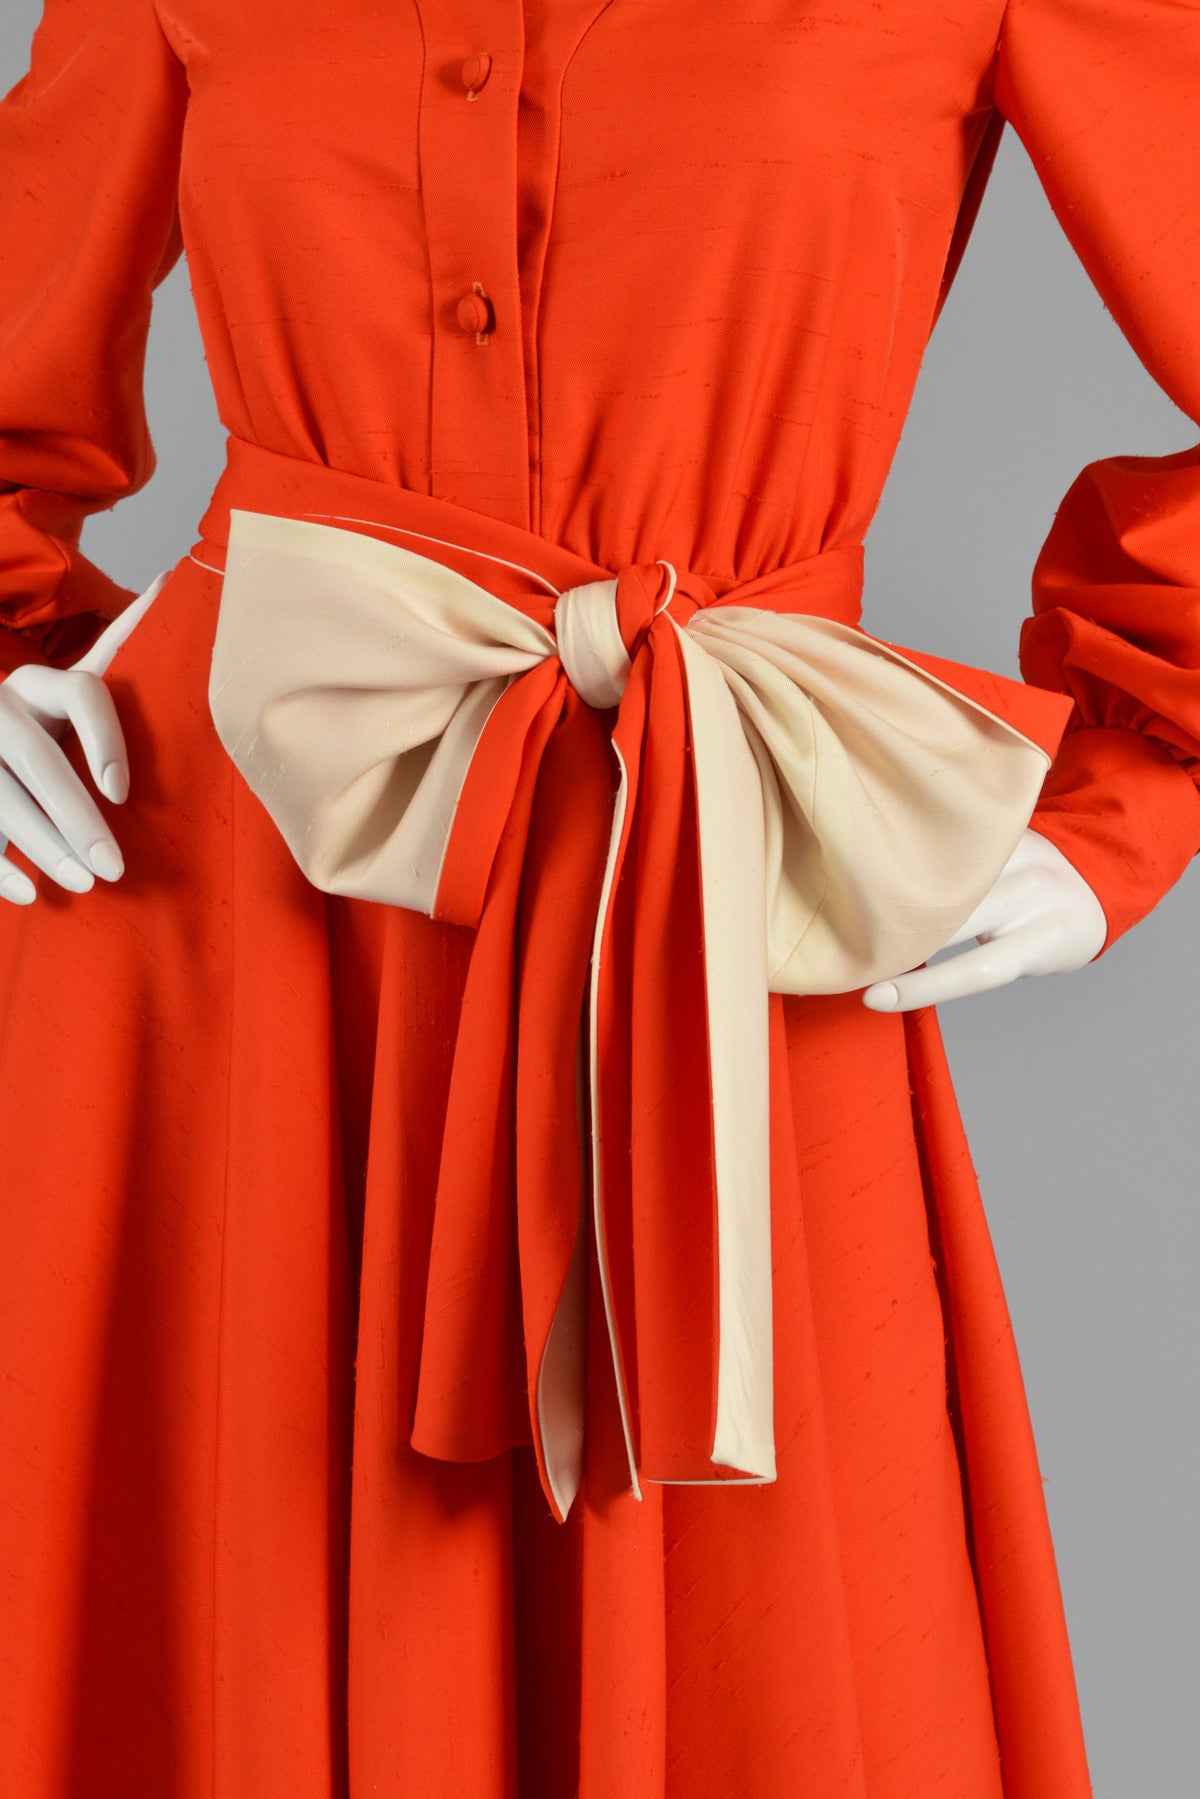 Women's 1970's Geoffrey Beene Silk Dress with Contrasting Sash For Sale